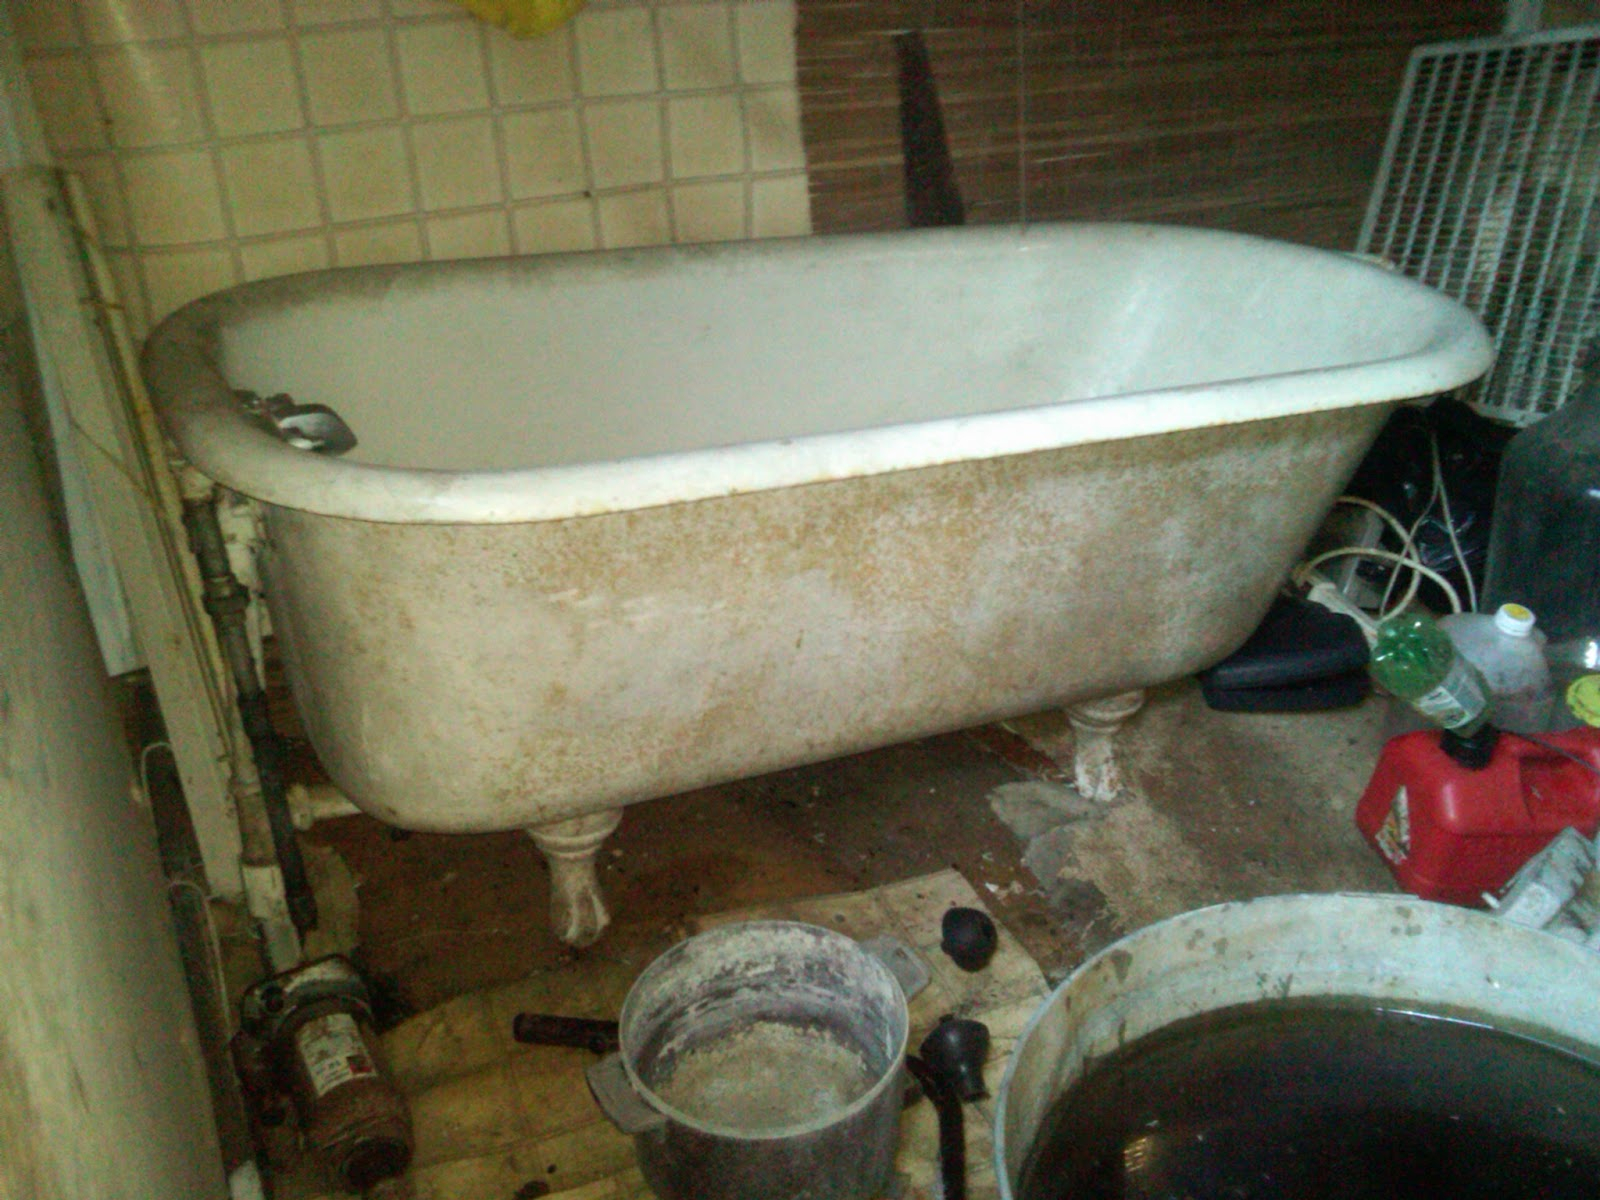 Refinishing Porcelain Bathtubs Sinks Part 2 Mom And Her Drill throughout sizing 1600 X 1200